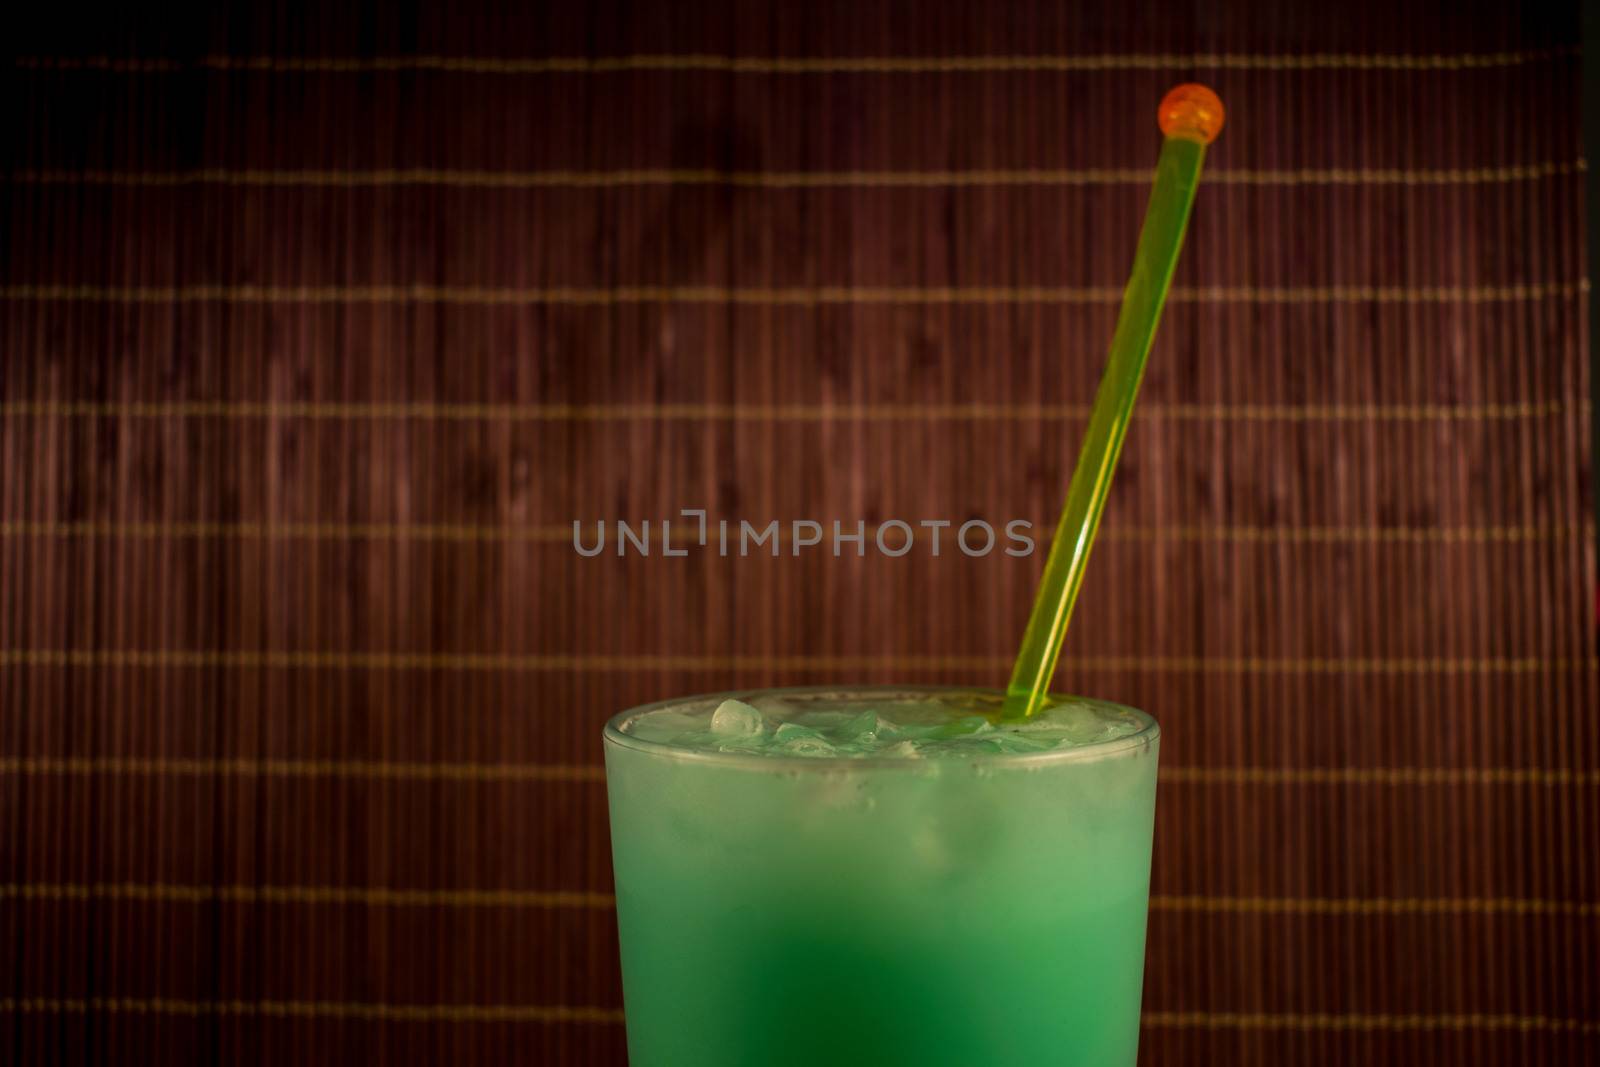 Cocktail green on a bamboo background